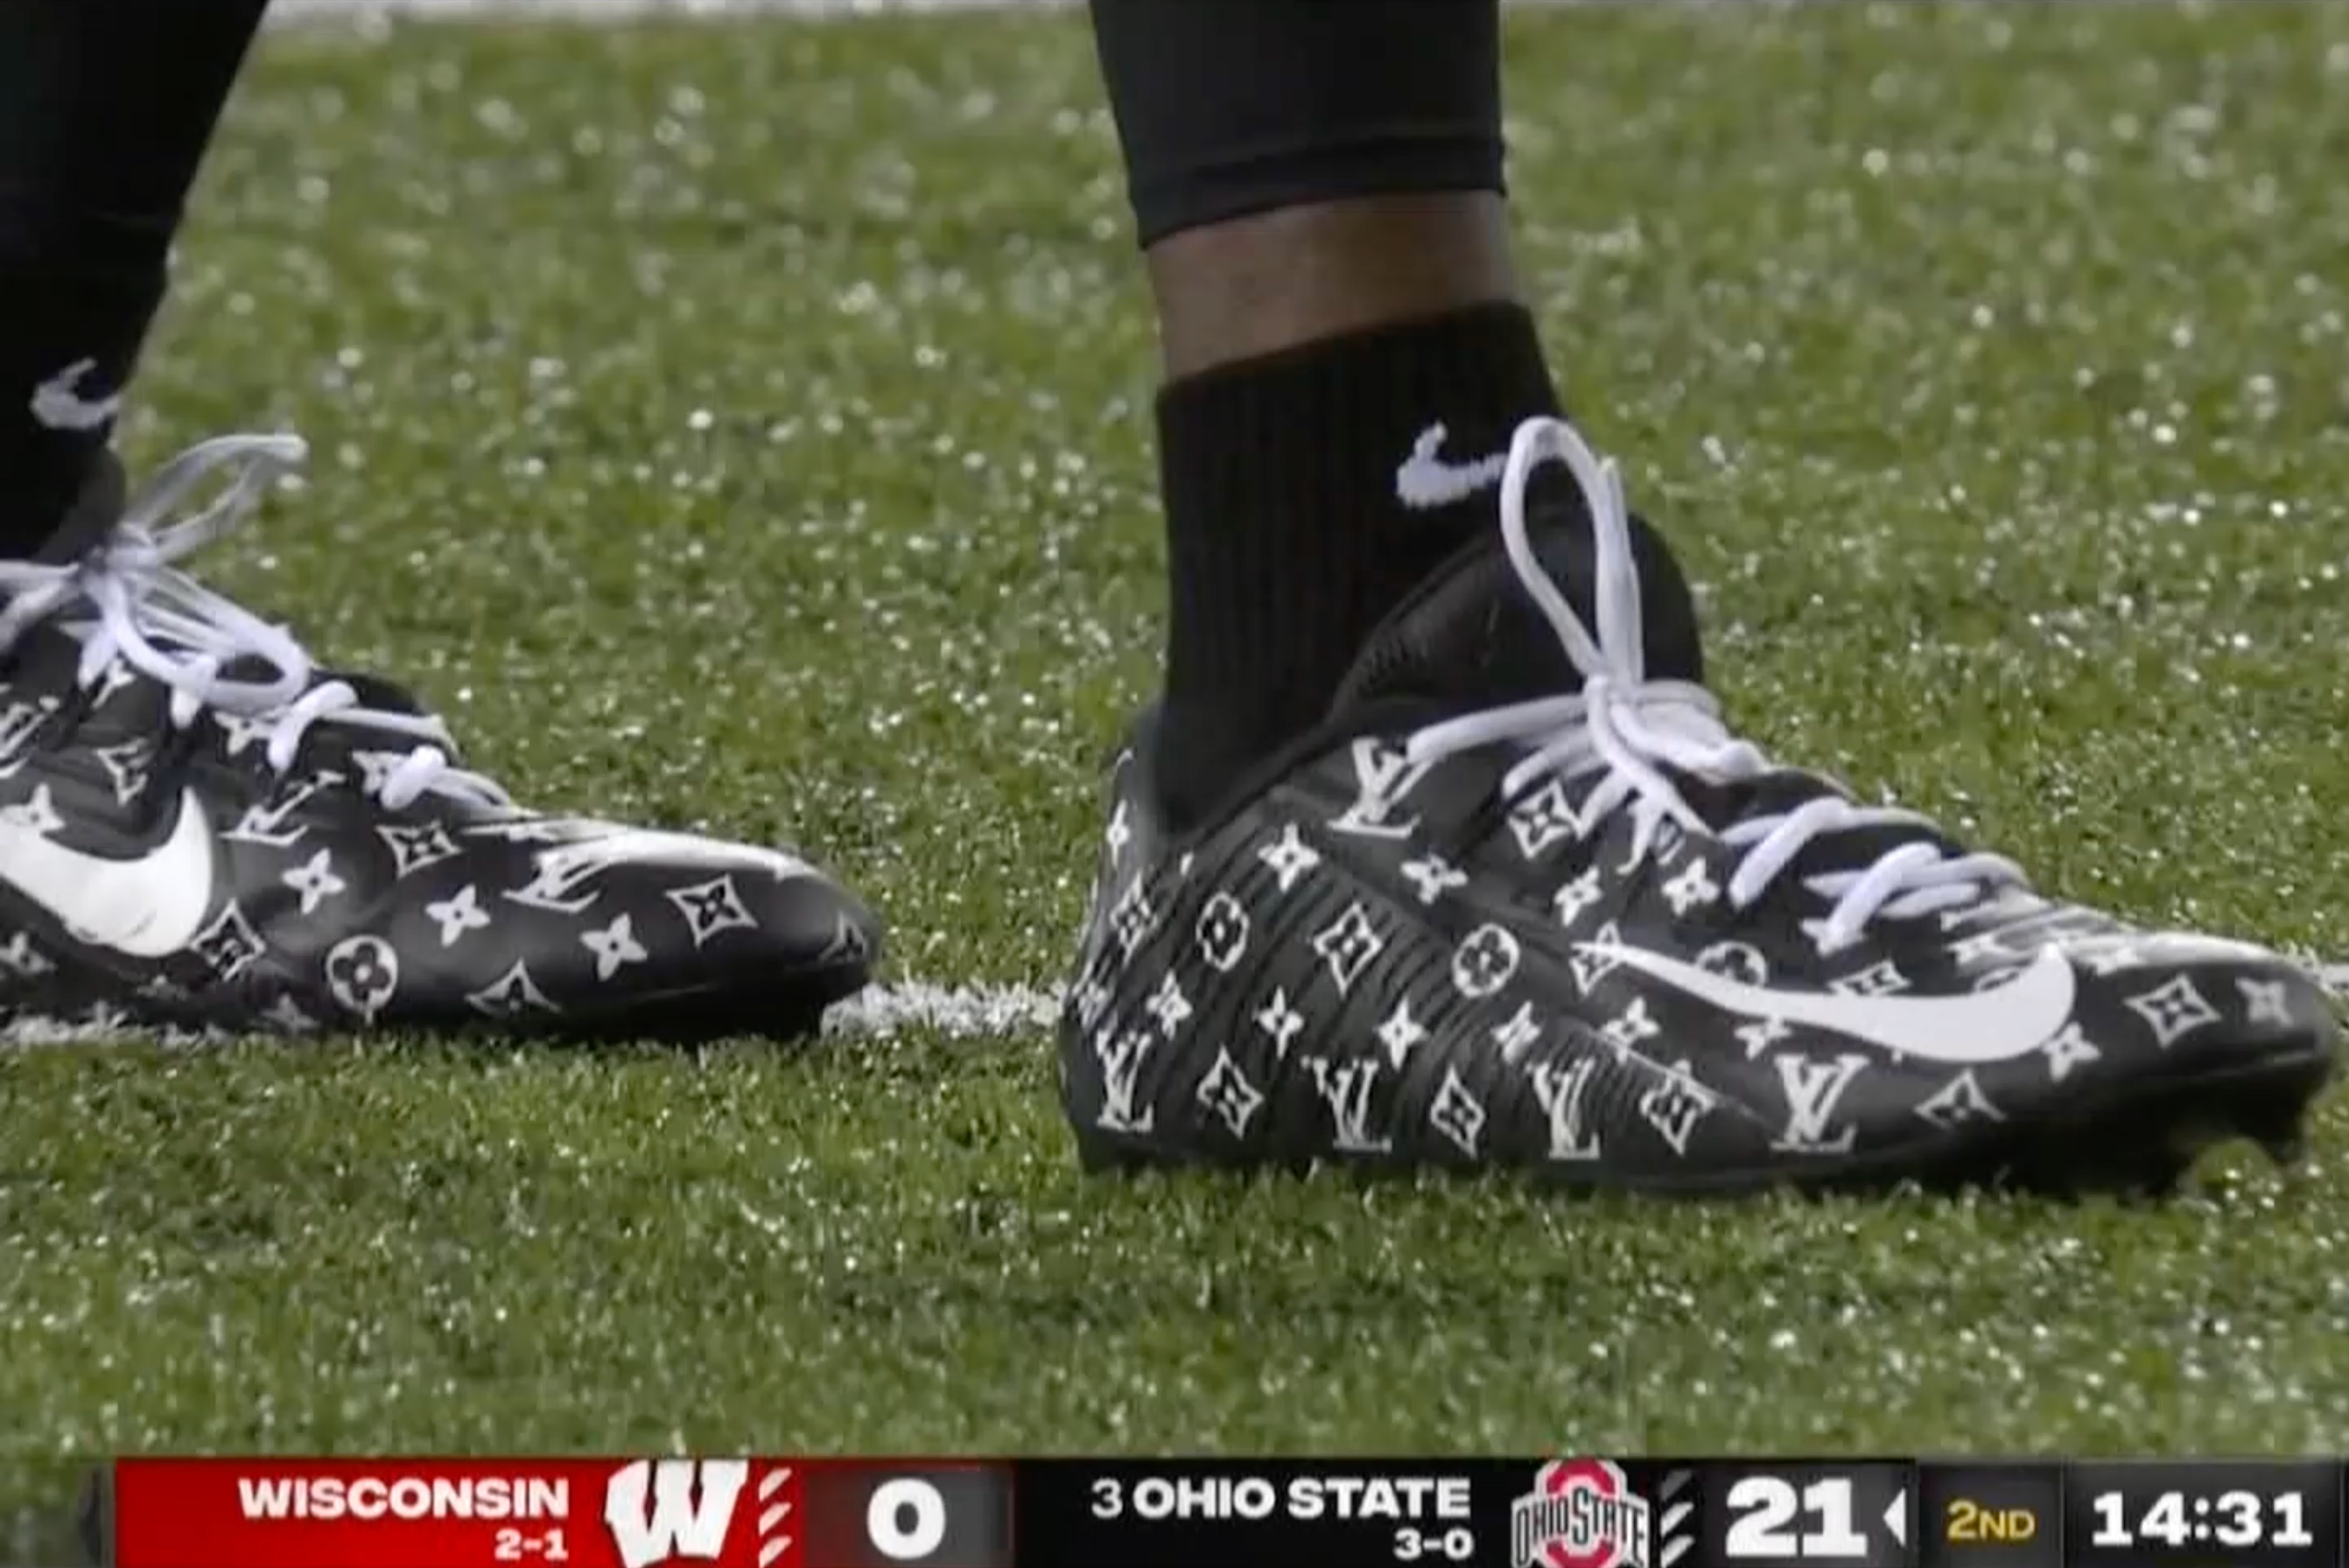 Ohio State Buckeyes receiver Marvin Harrison Jr. wears Louis Vuitton cleats  and an Apple Watch - ESPN